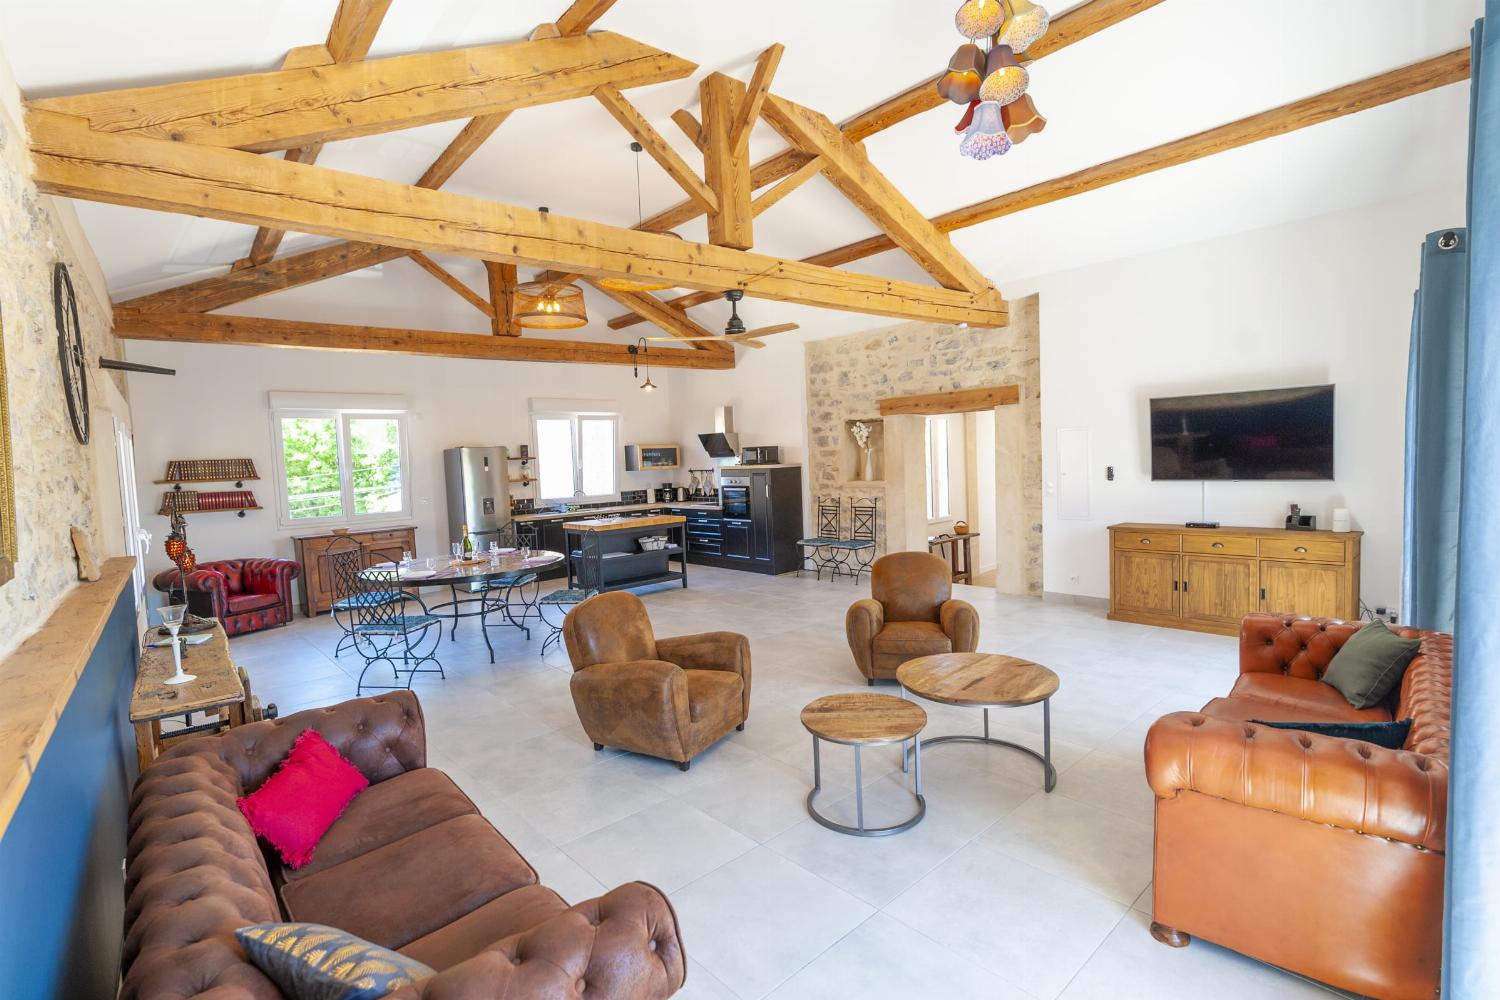 Living room | Vacation home in the South of France